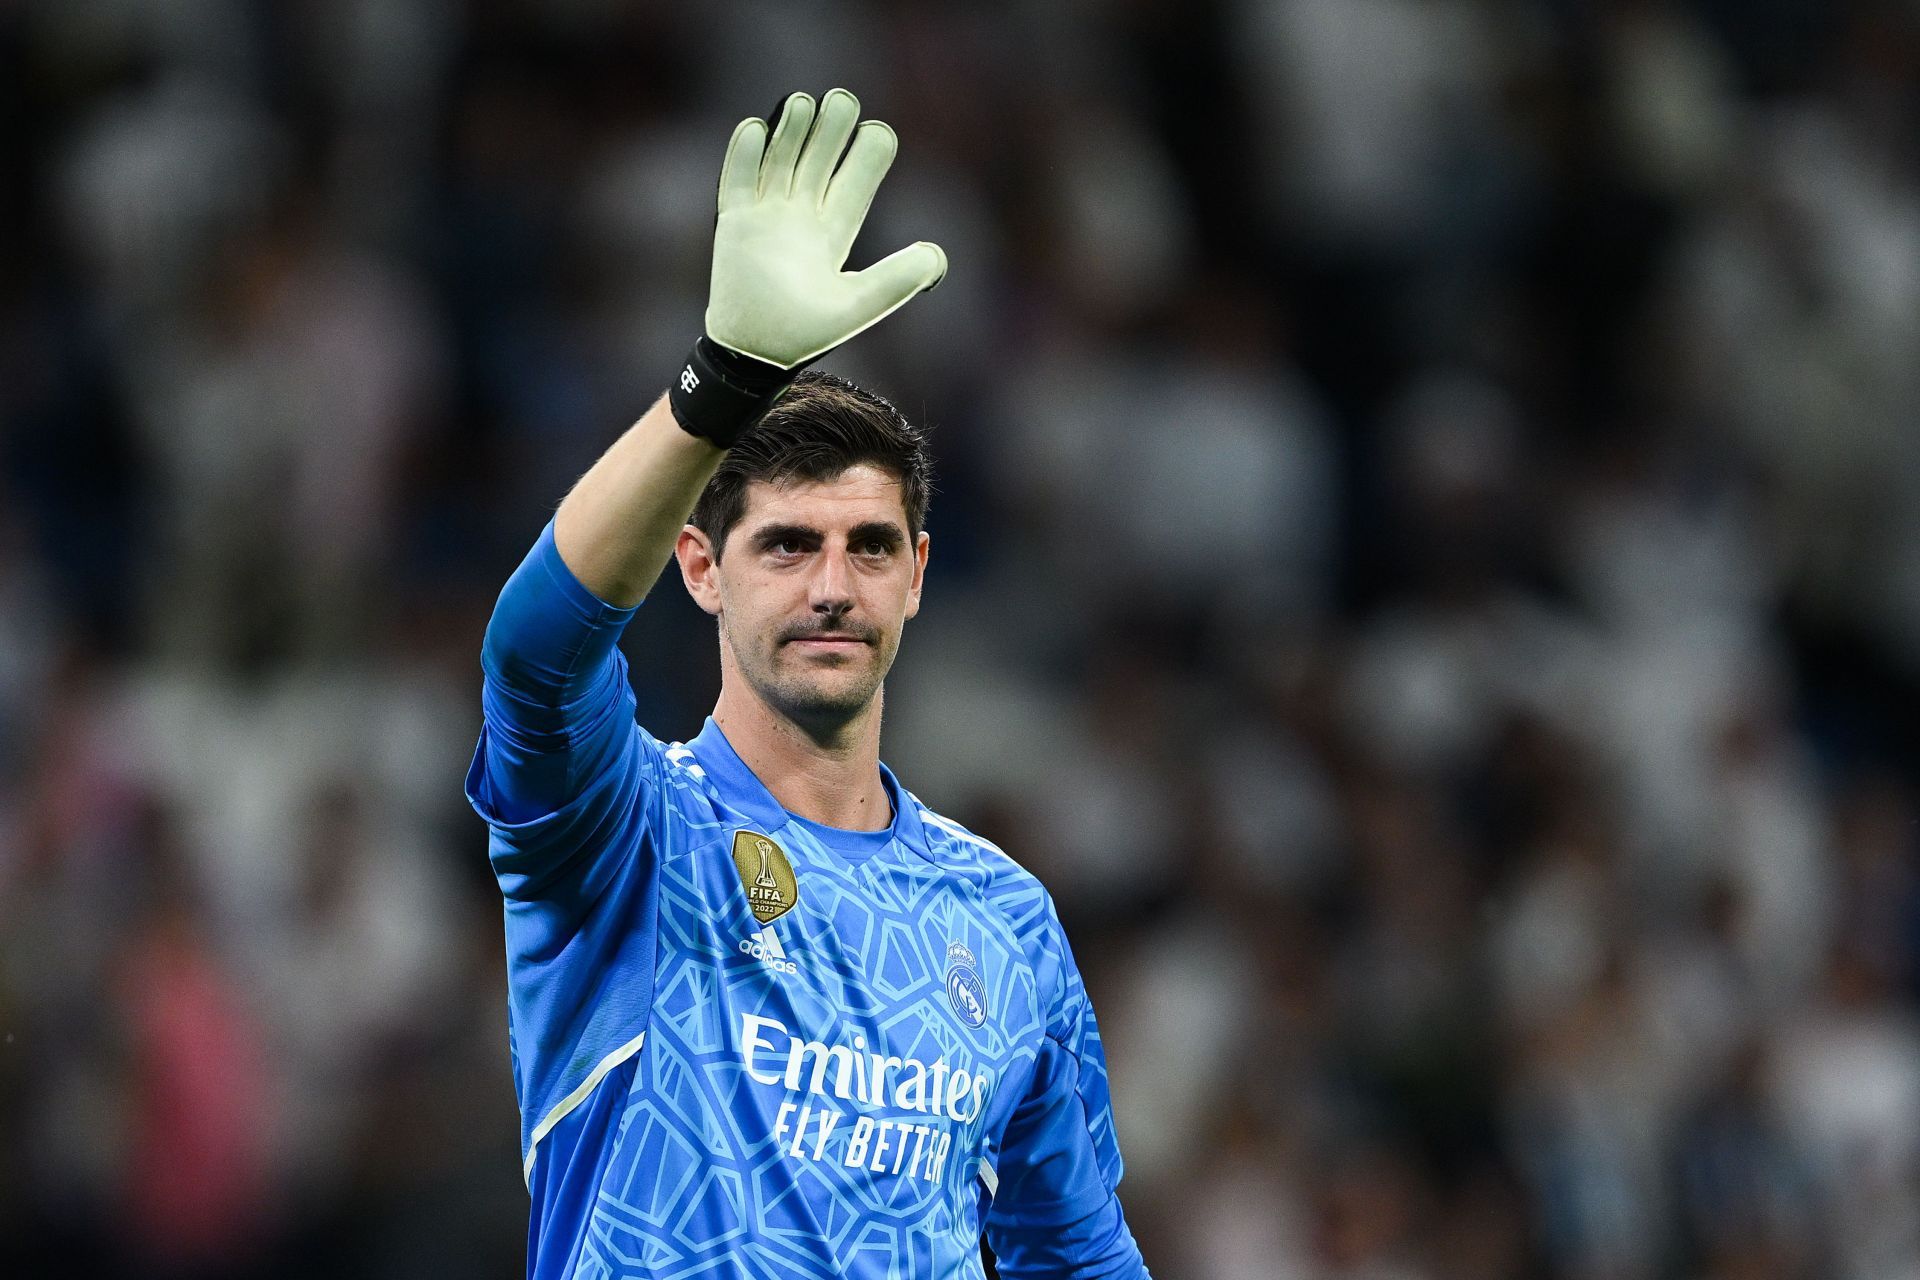 Courtois has been excellent for Real Madrid